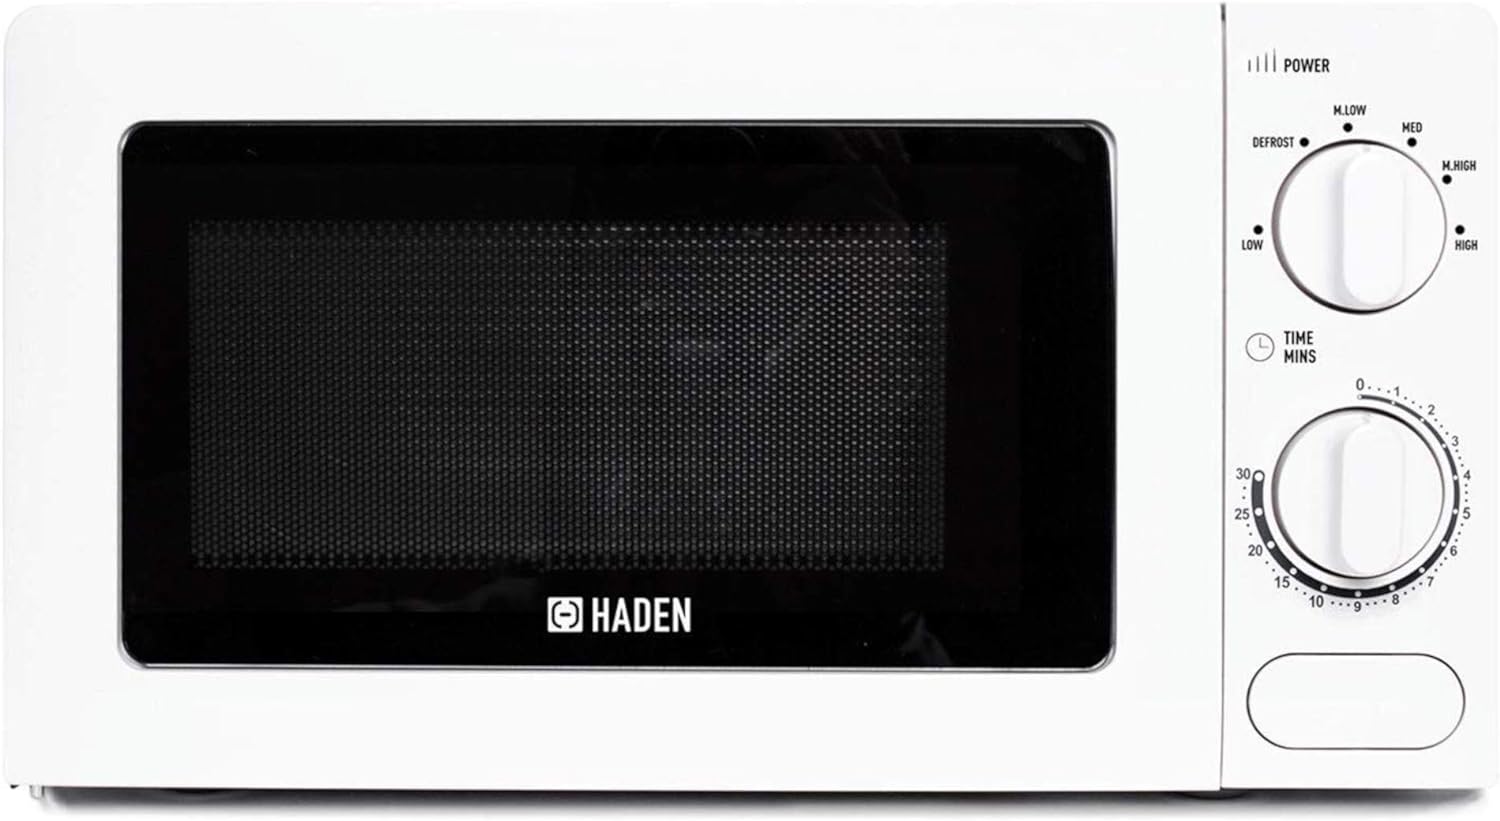 haden 17l white microwave review